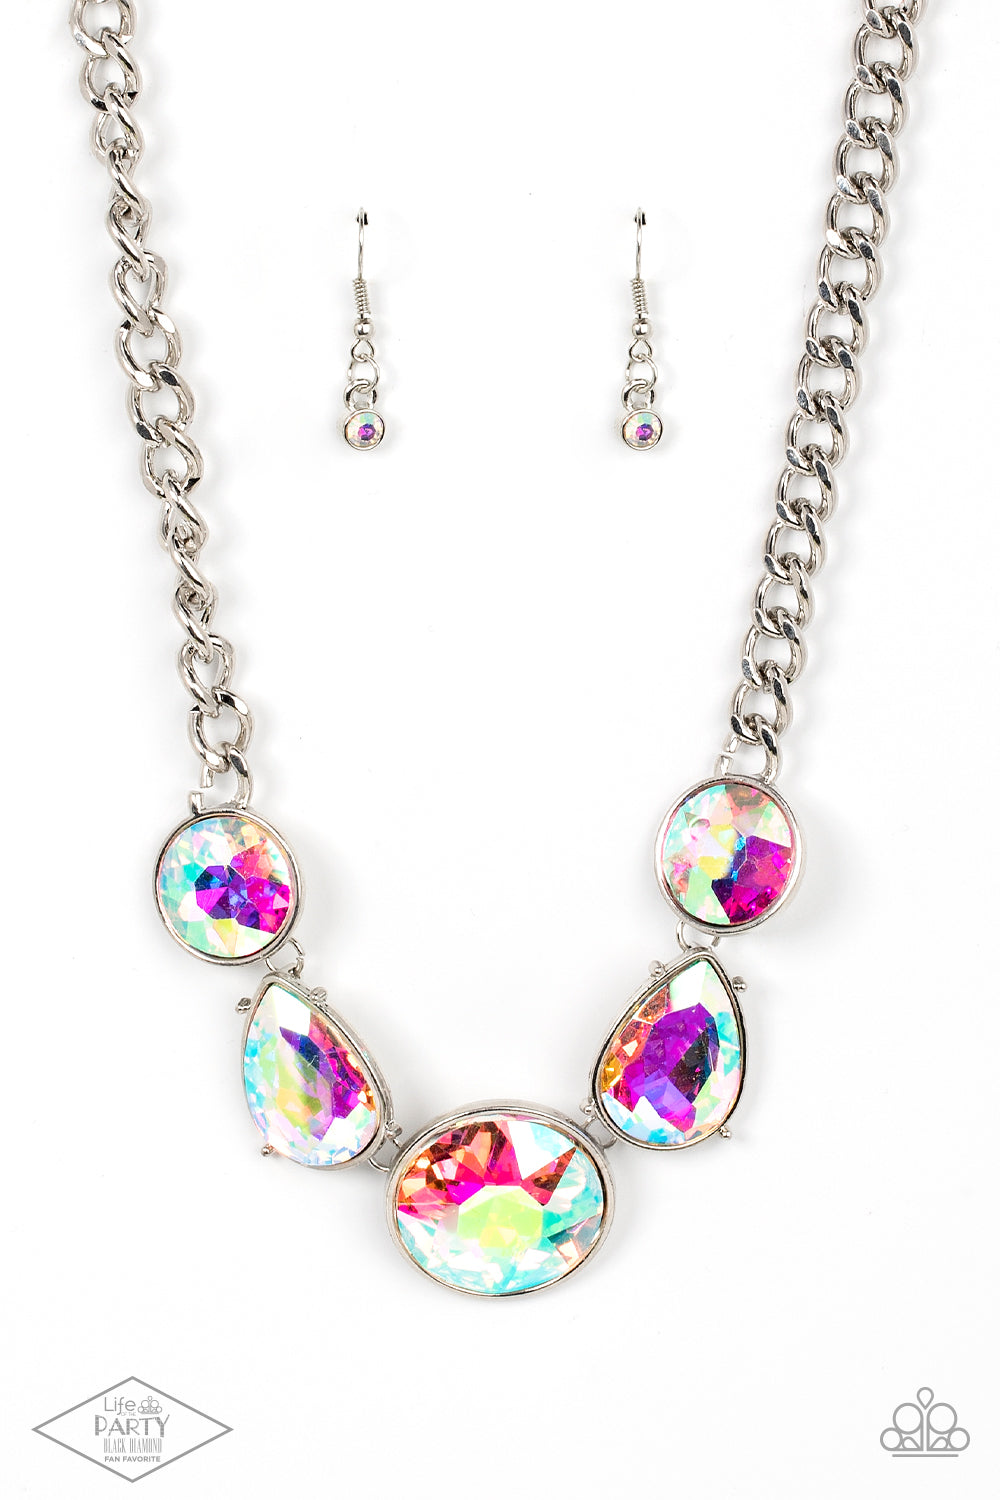 Paparazzi Accessories - All The Worlds My Stage #N929 Box 10 - Multi iridescent Necklace